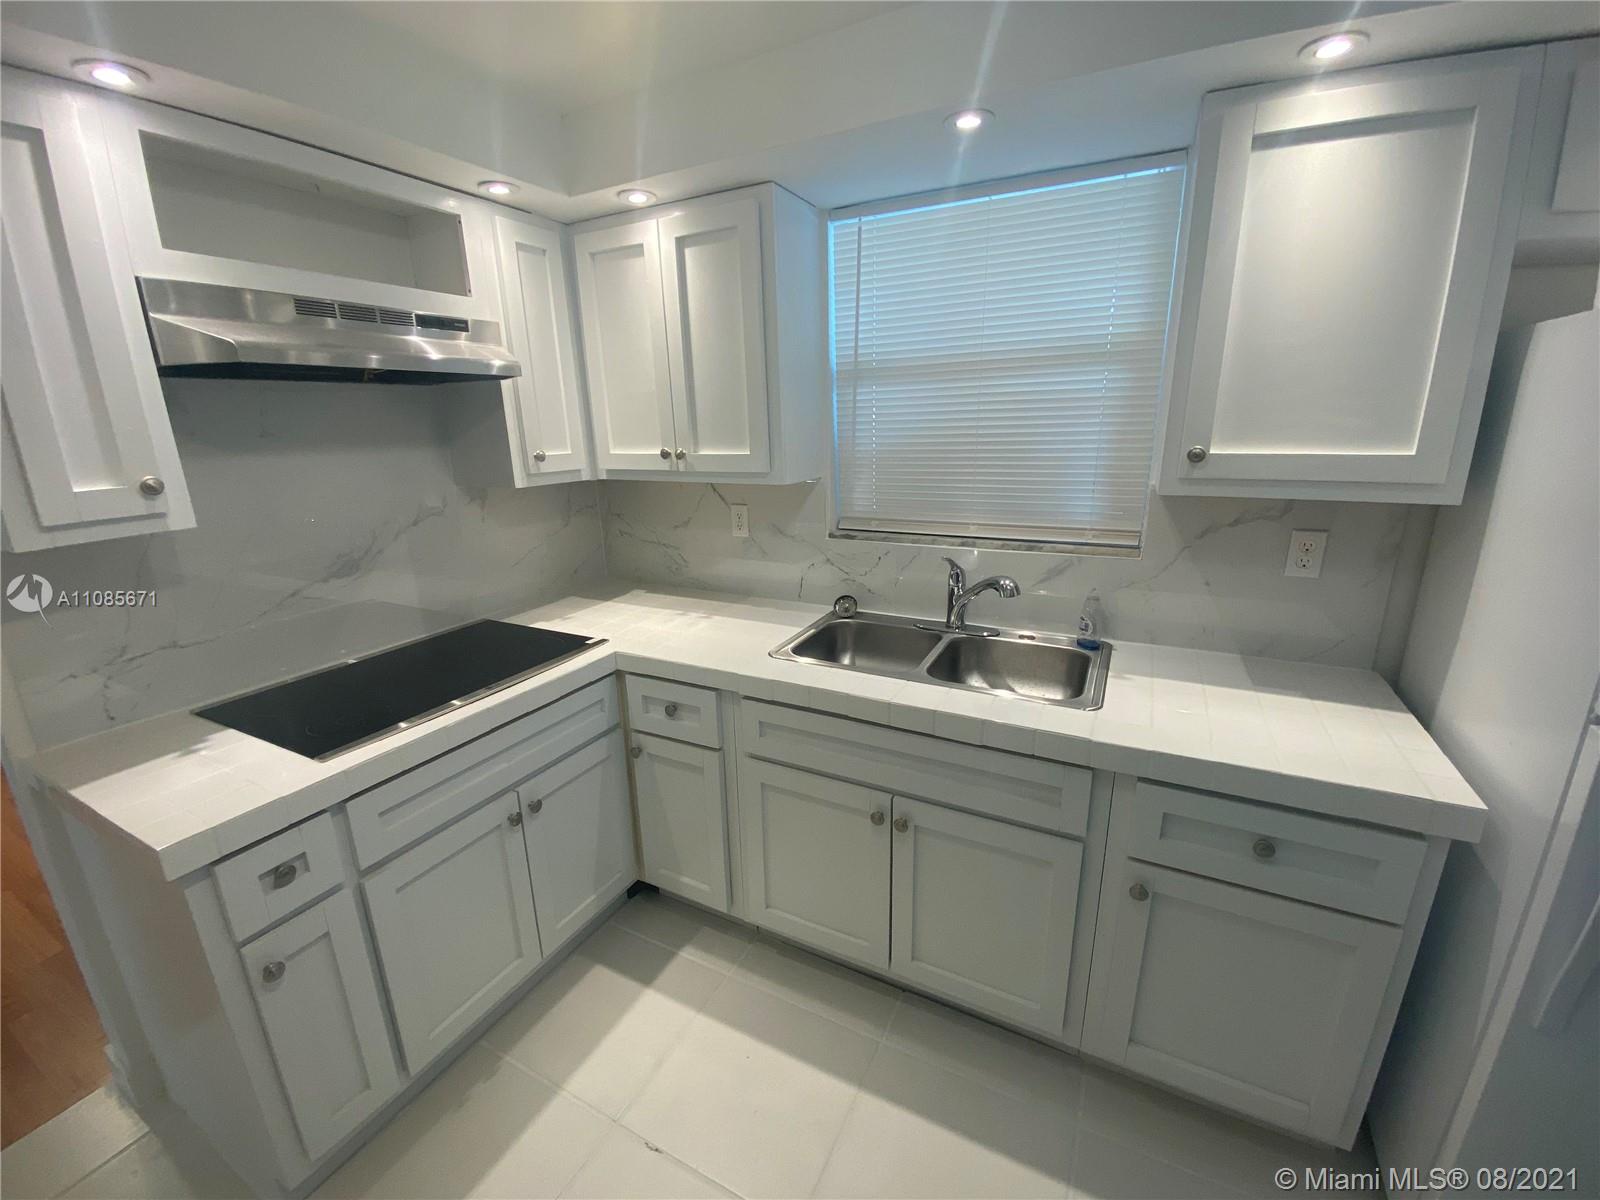 a kitchen with white cabinets sink and stove